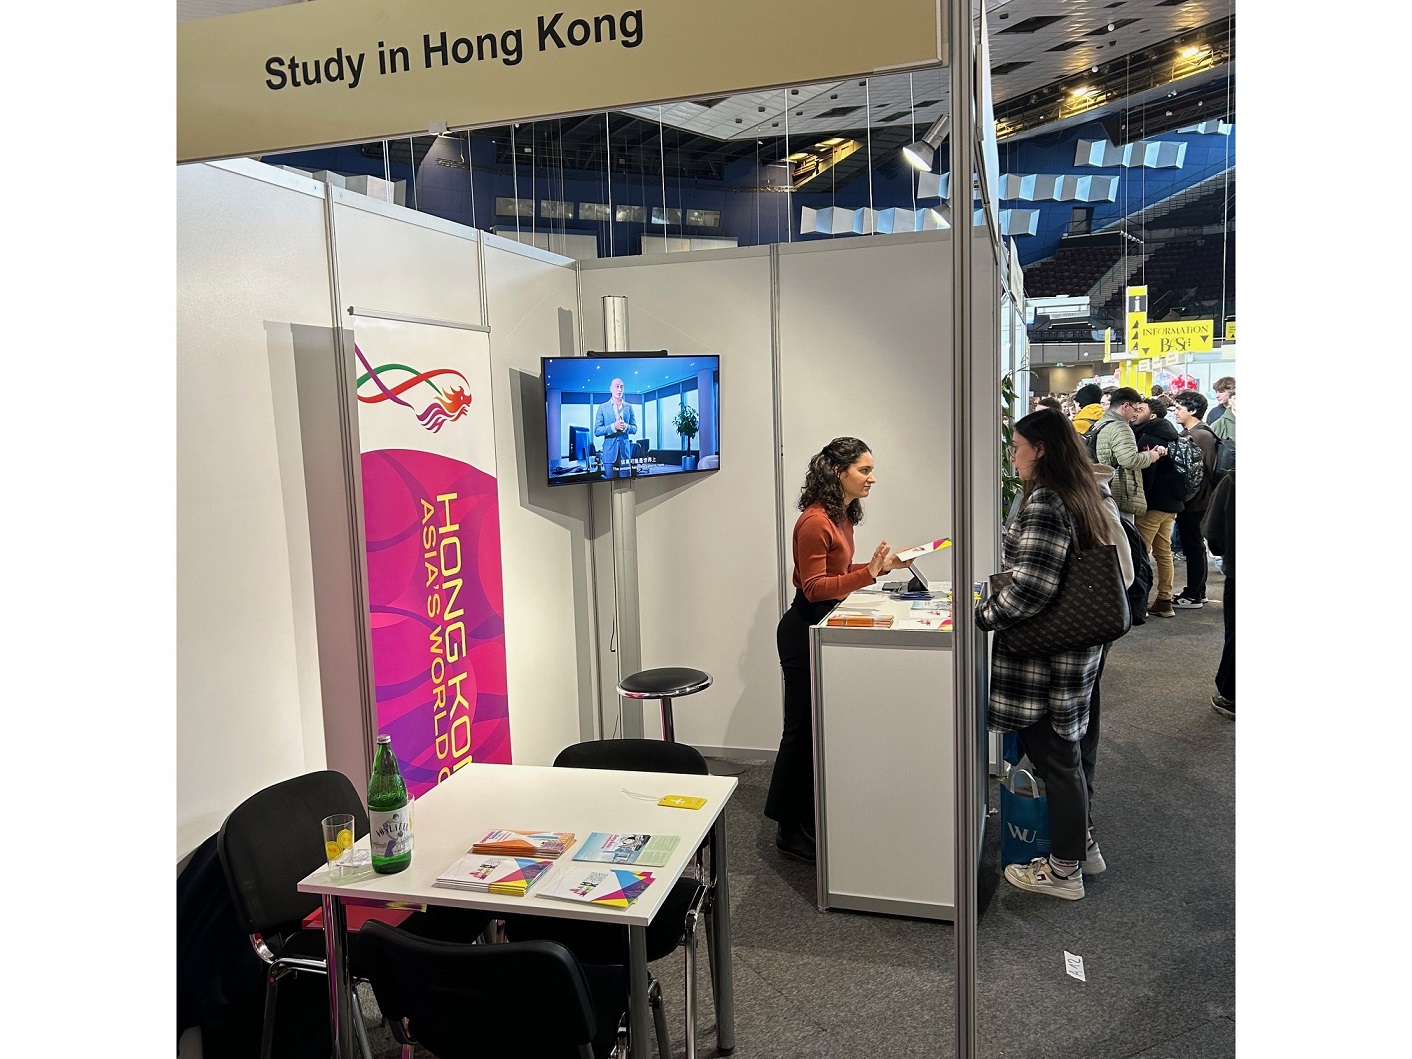 HKETO Berlin hosted a booth at the Austrian education fair BeSt Vienna, which ran from March 7 to 10 (Vienna time), to introduce study opportunities in Hong Kong.